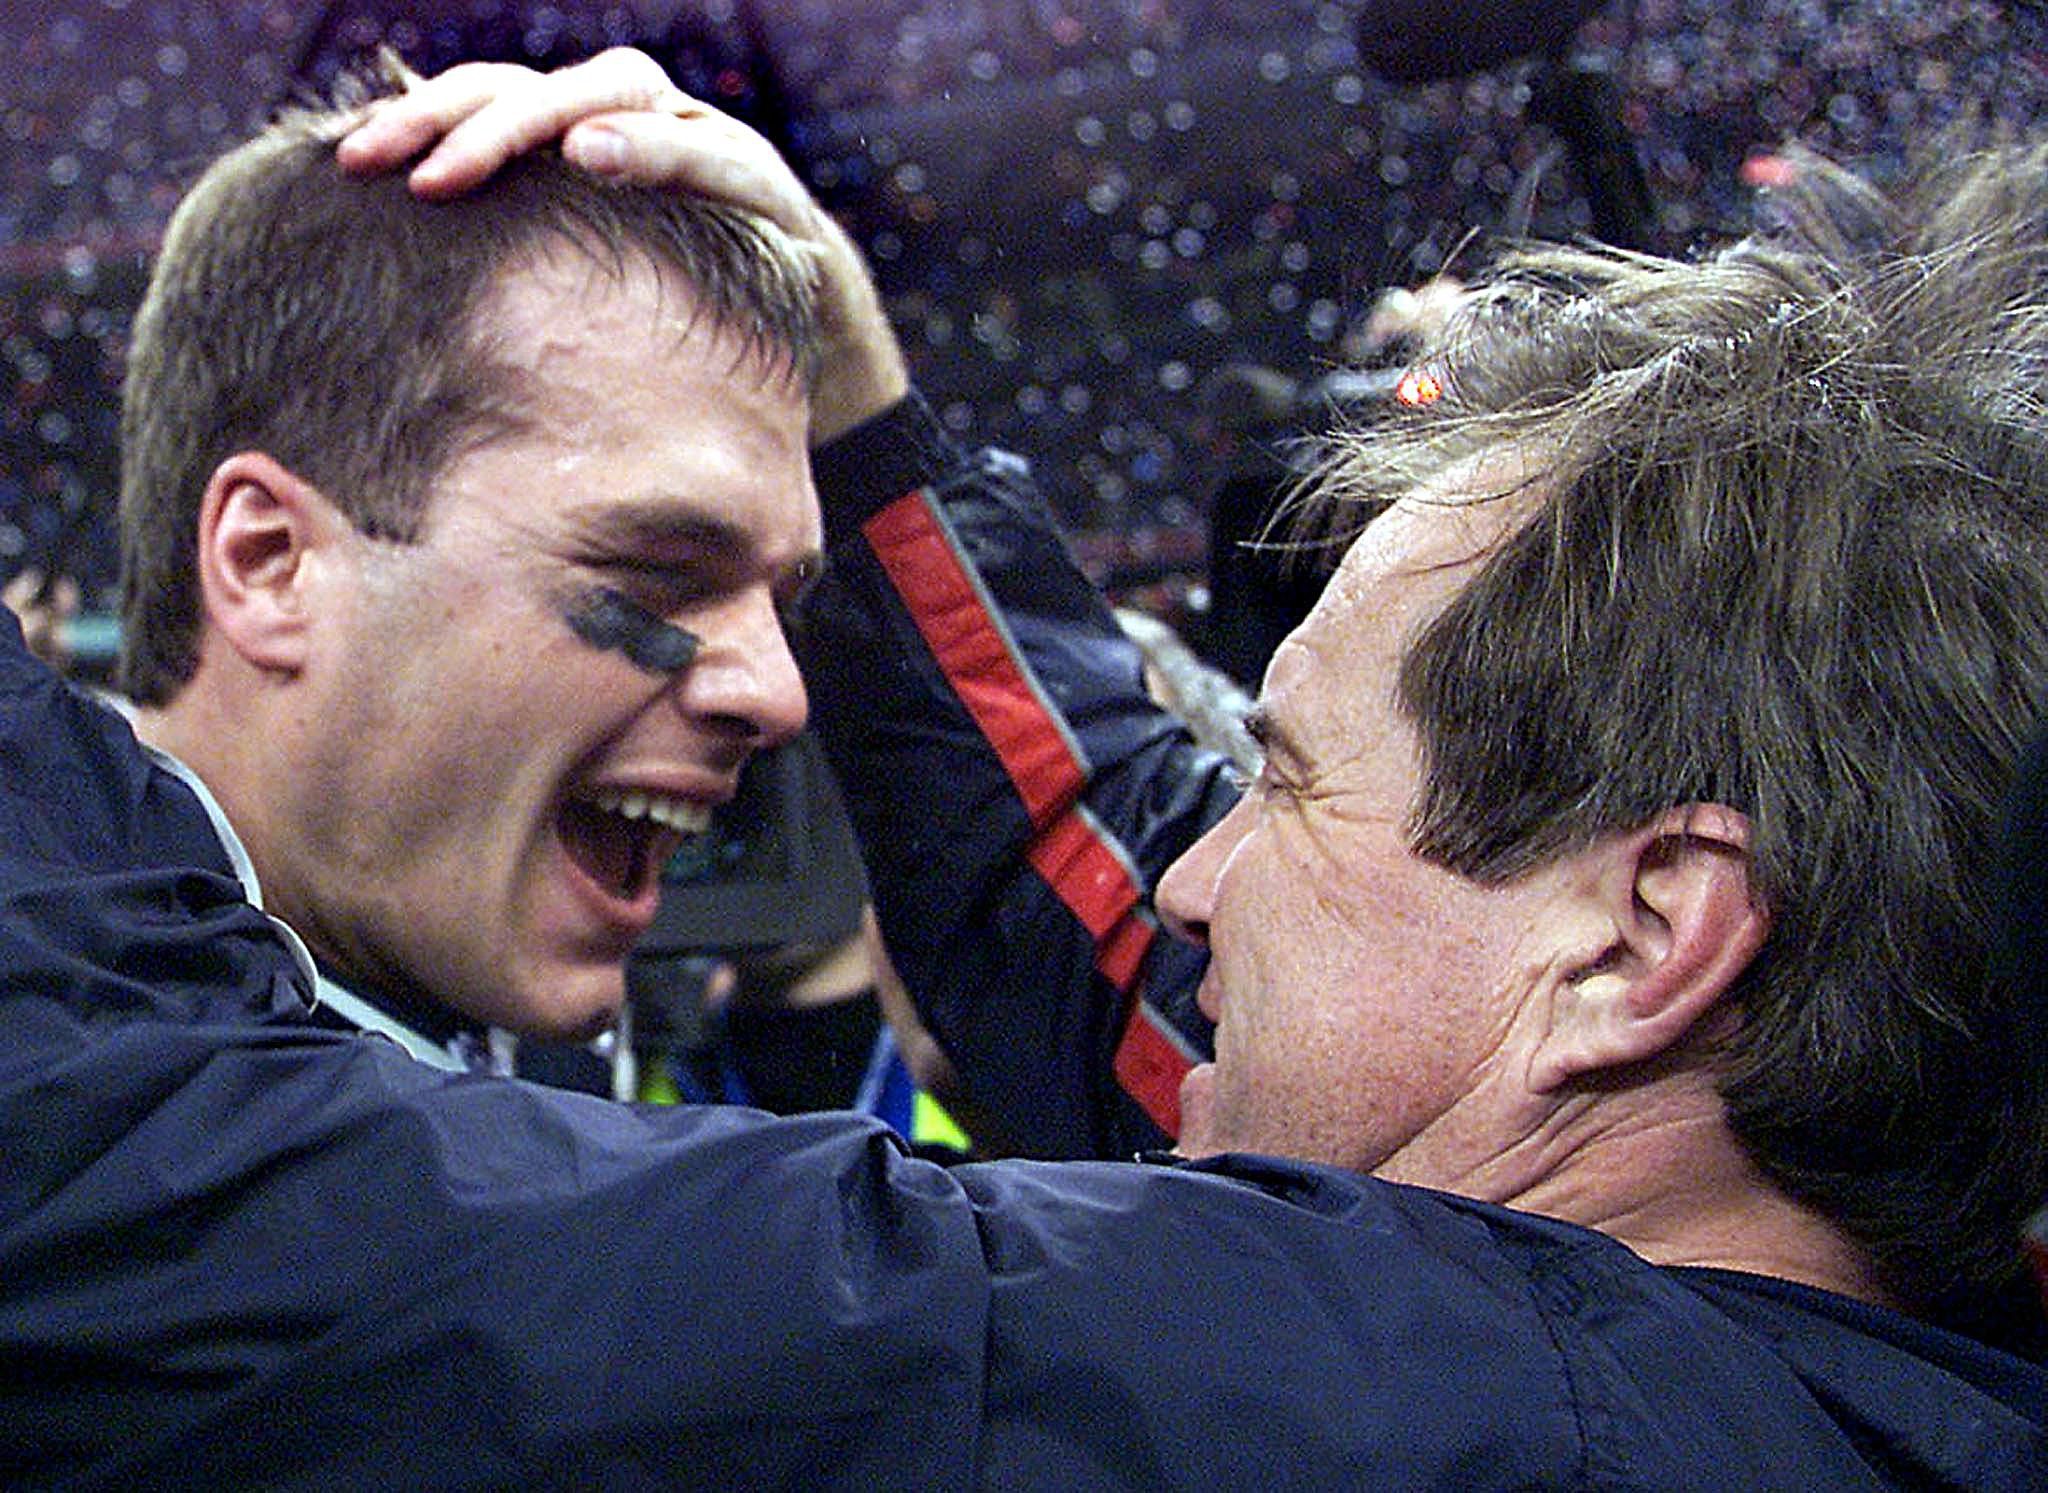 Tom Brady and Bill Bellichick embrace after winning their first Super Bowl together in 2002.